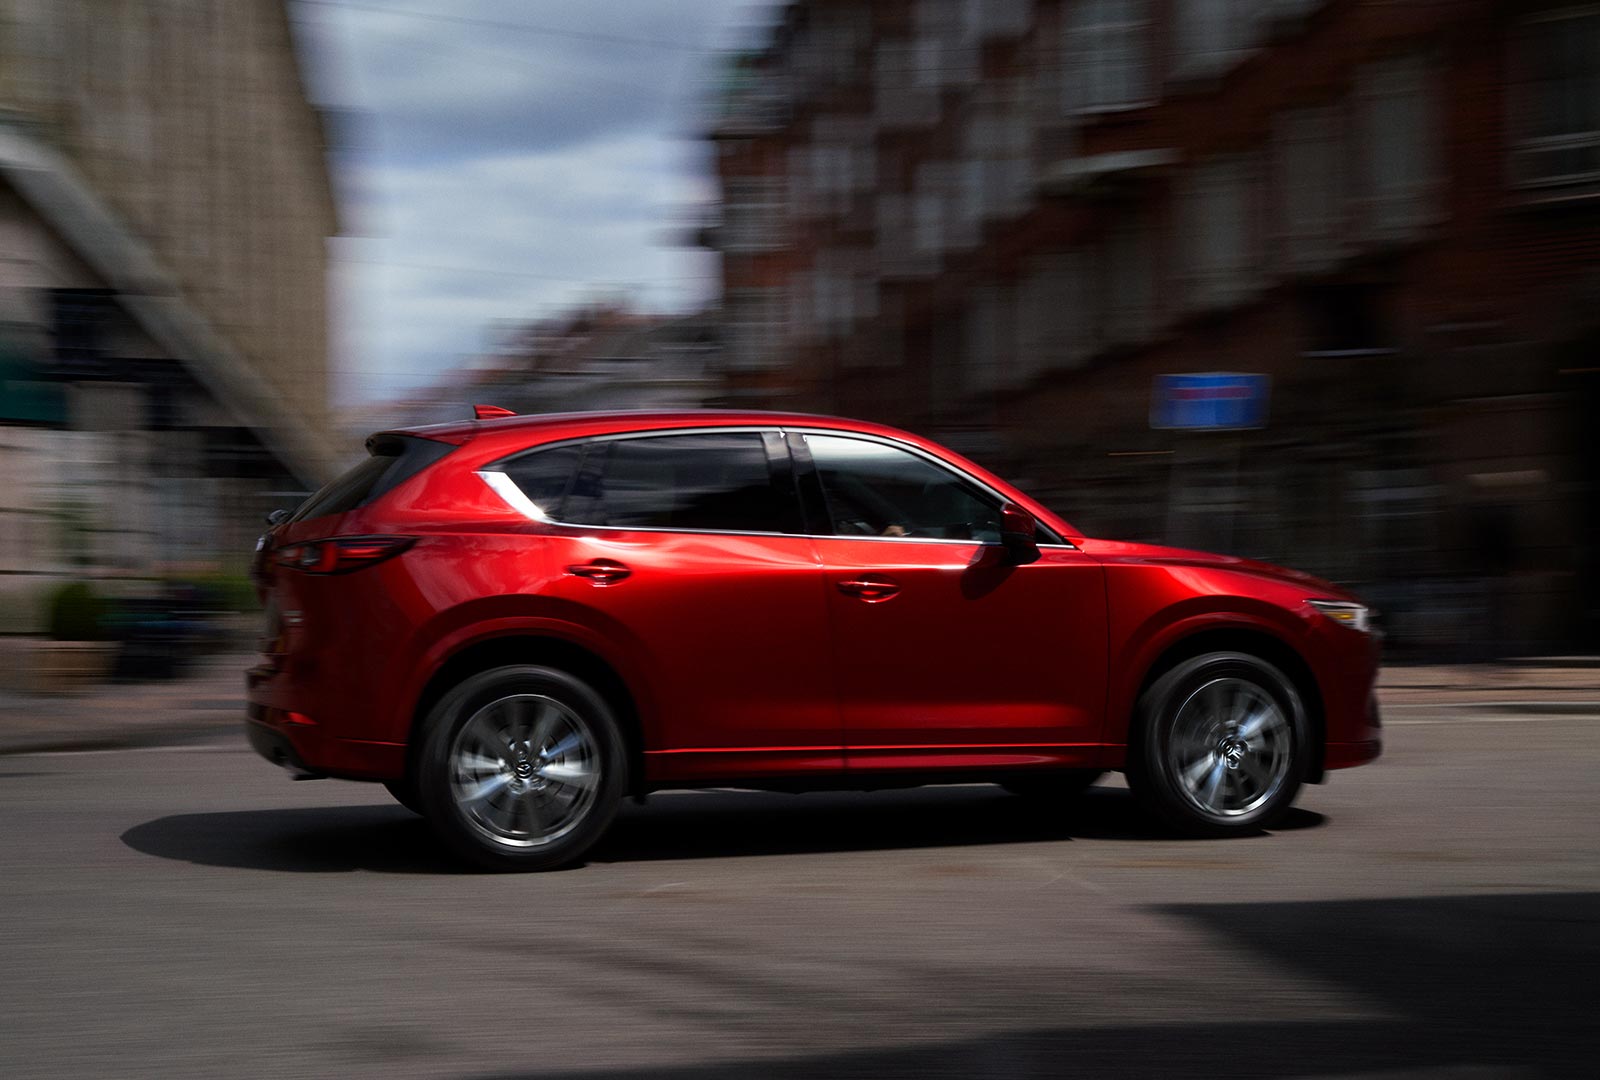 Soul Red Crystal CX-5 blurred profile as it moves along urban street.